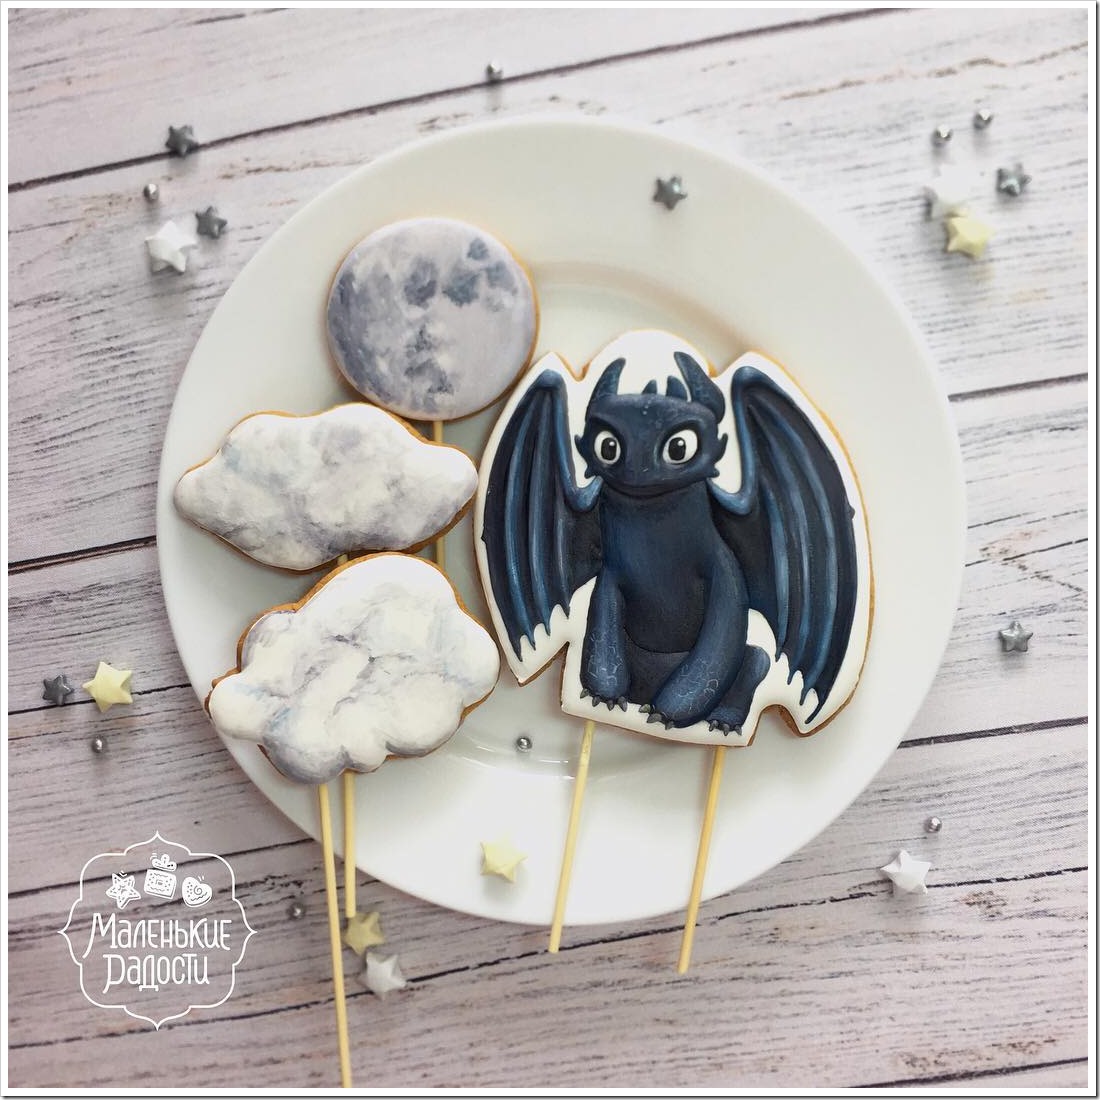 How To Train Your Dragon Cookies 